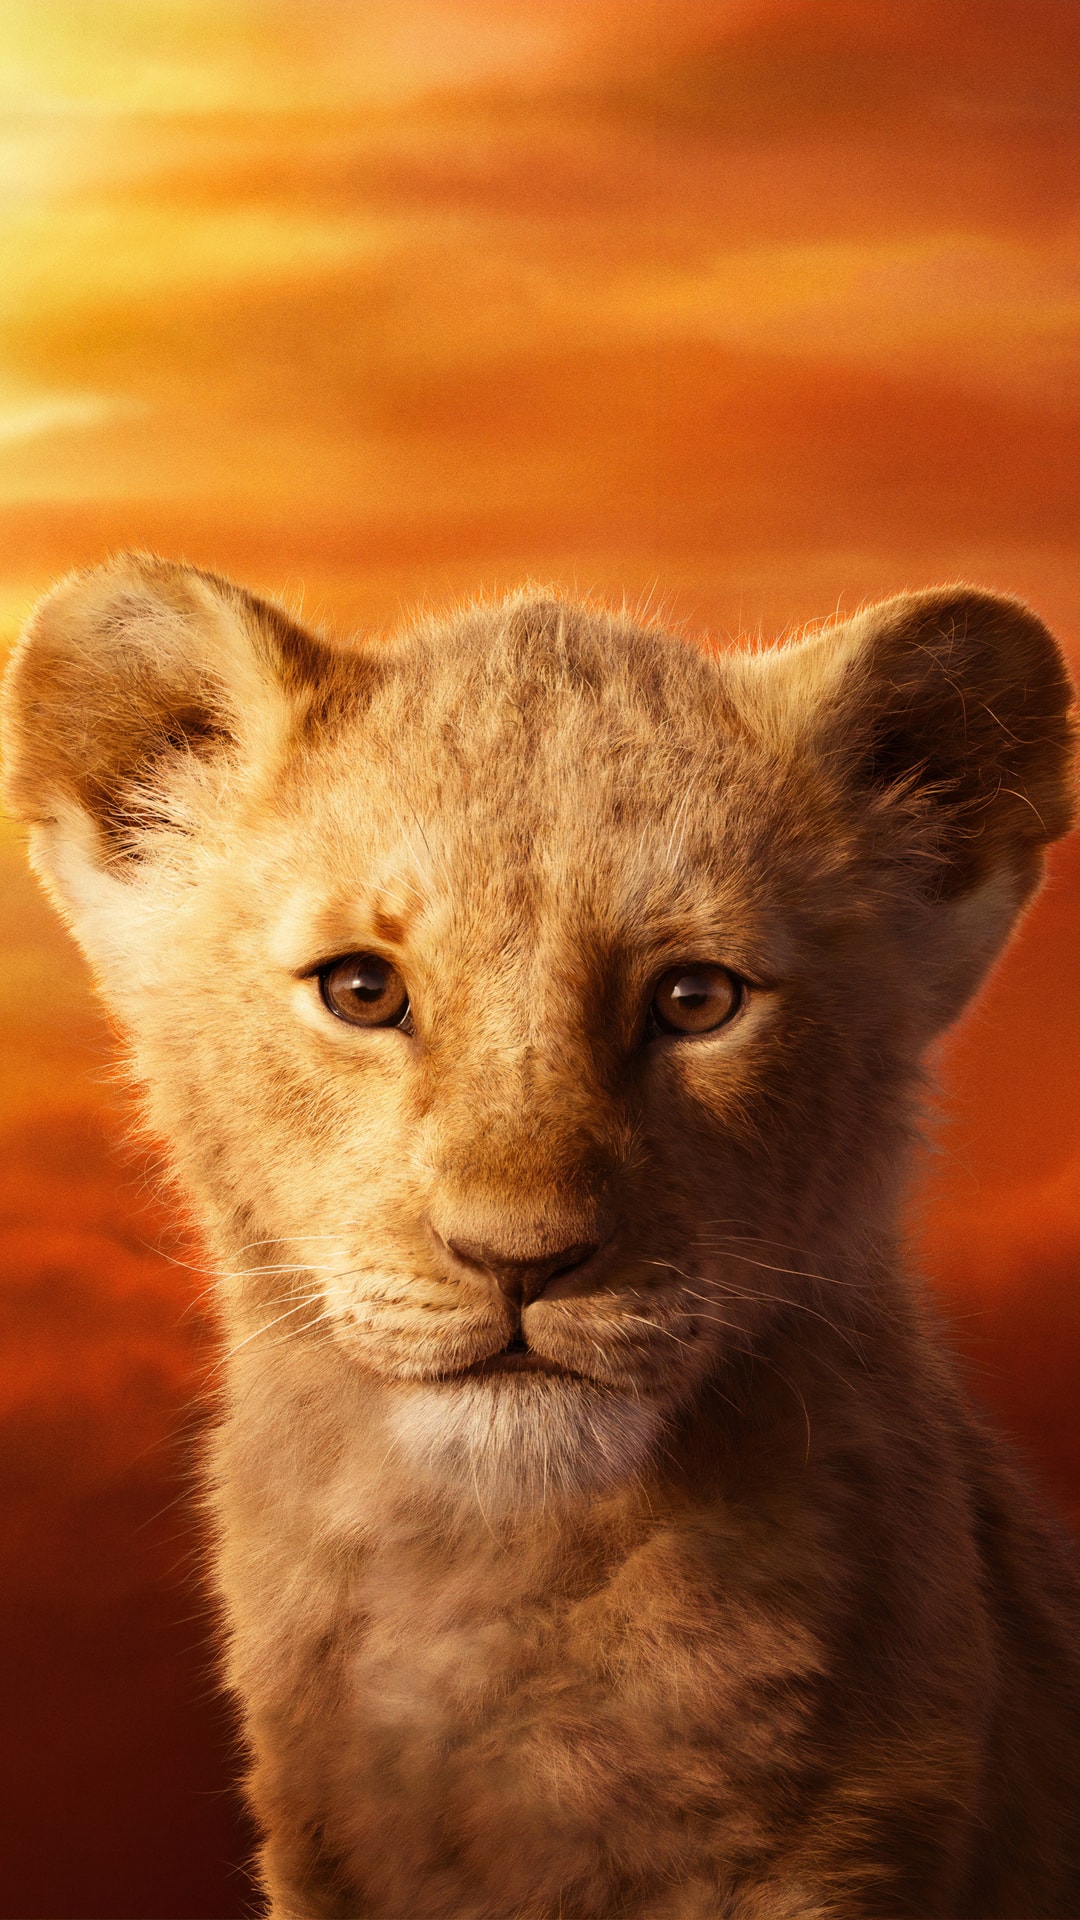 Simba The Lion King 4k Wallpaper And Easy To